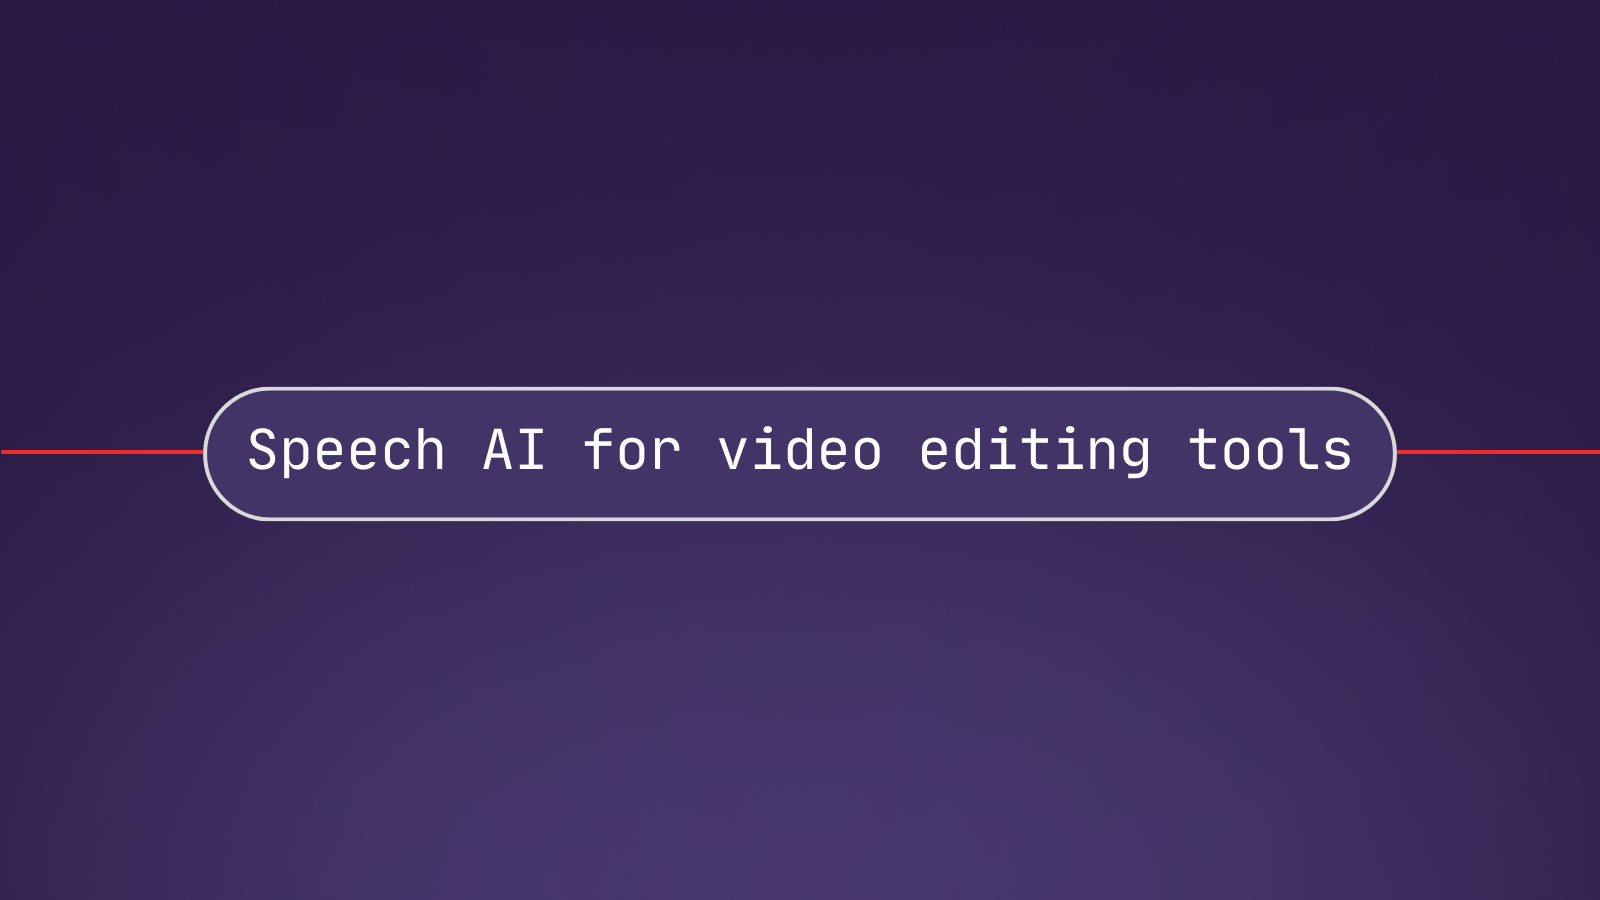 Top 3 ways to enhance AI video editing tools with Speech AI